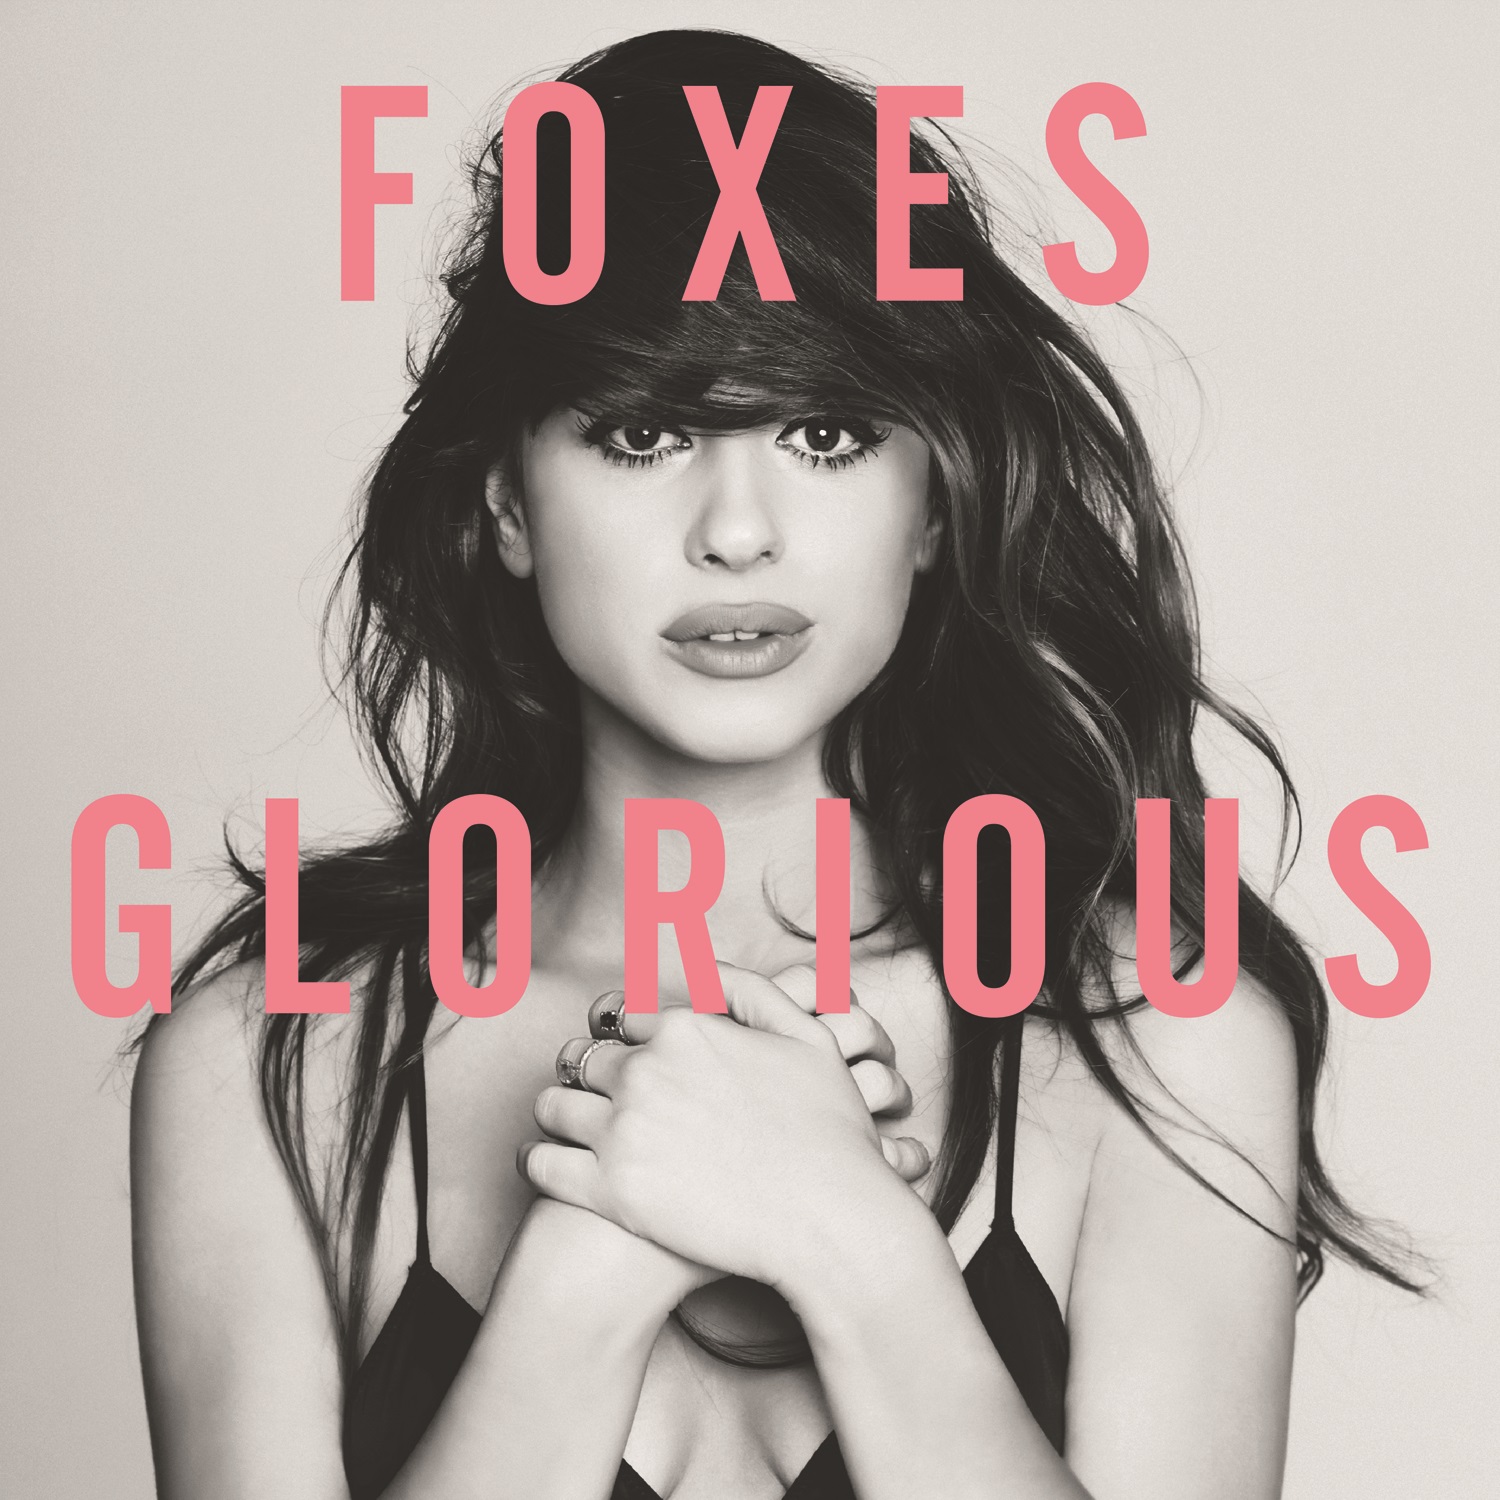 Foxes-Glorious-Cover-Art-Jpg